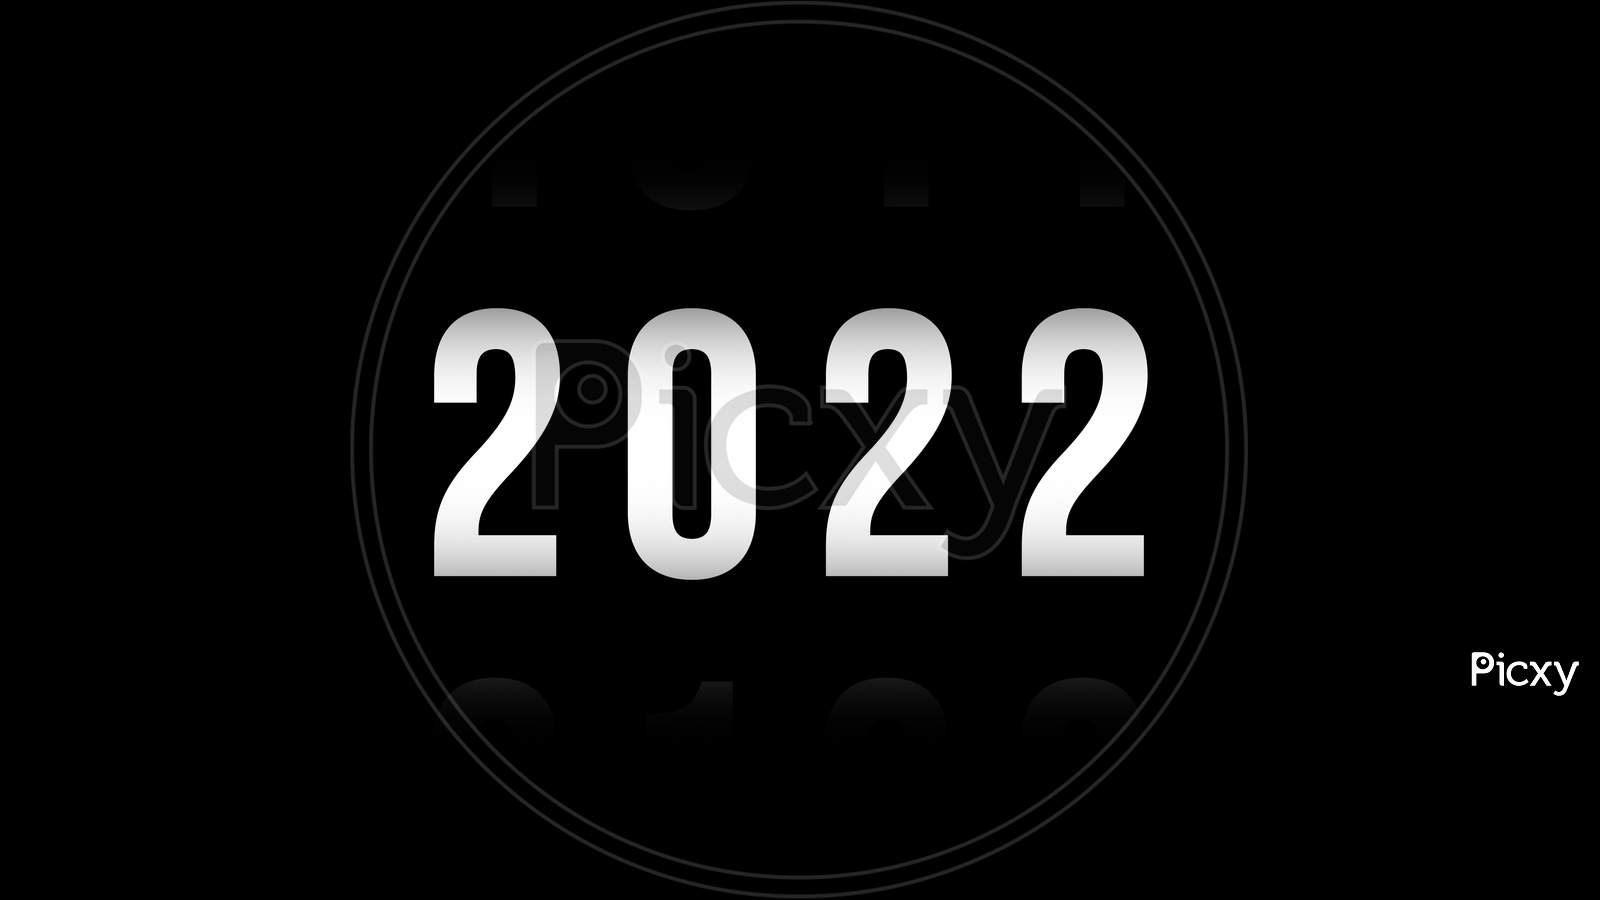 2022 New Year Number On Black Isolated Background. Font Background And Typography Concept.